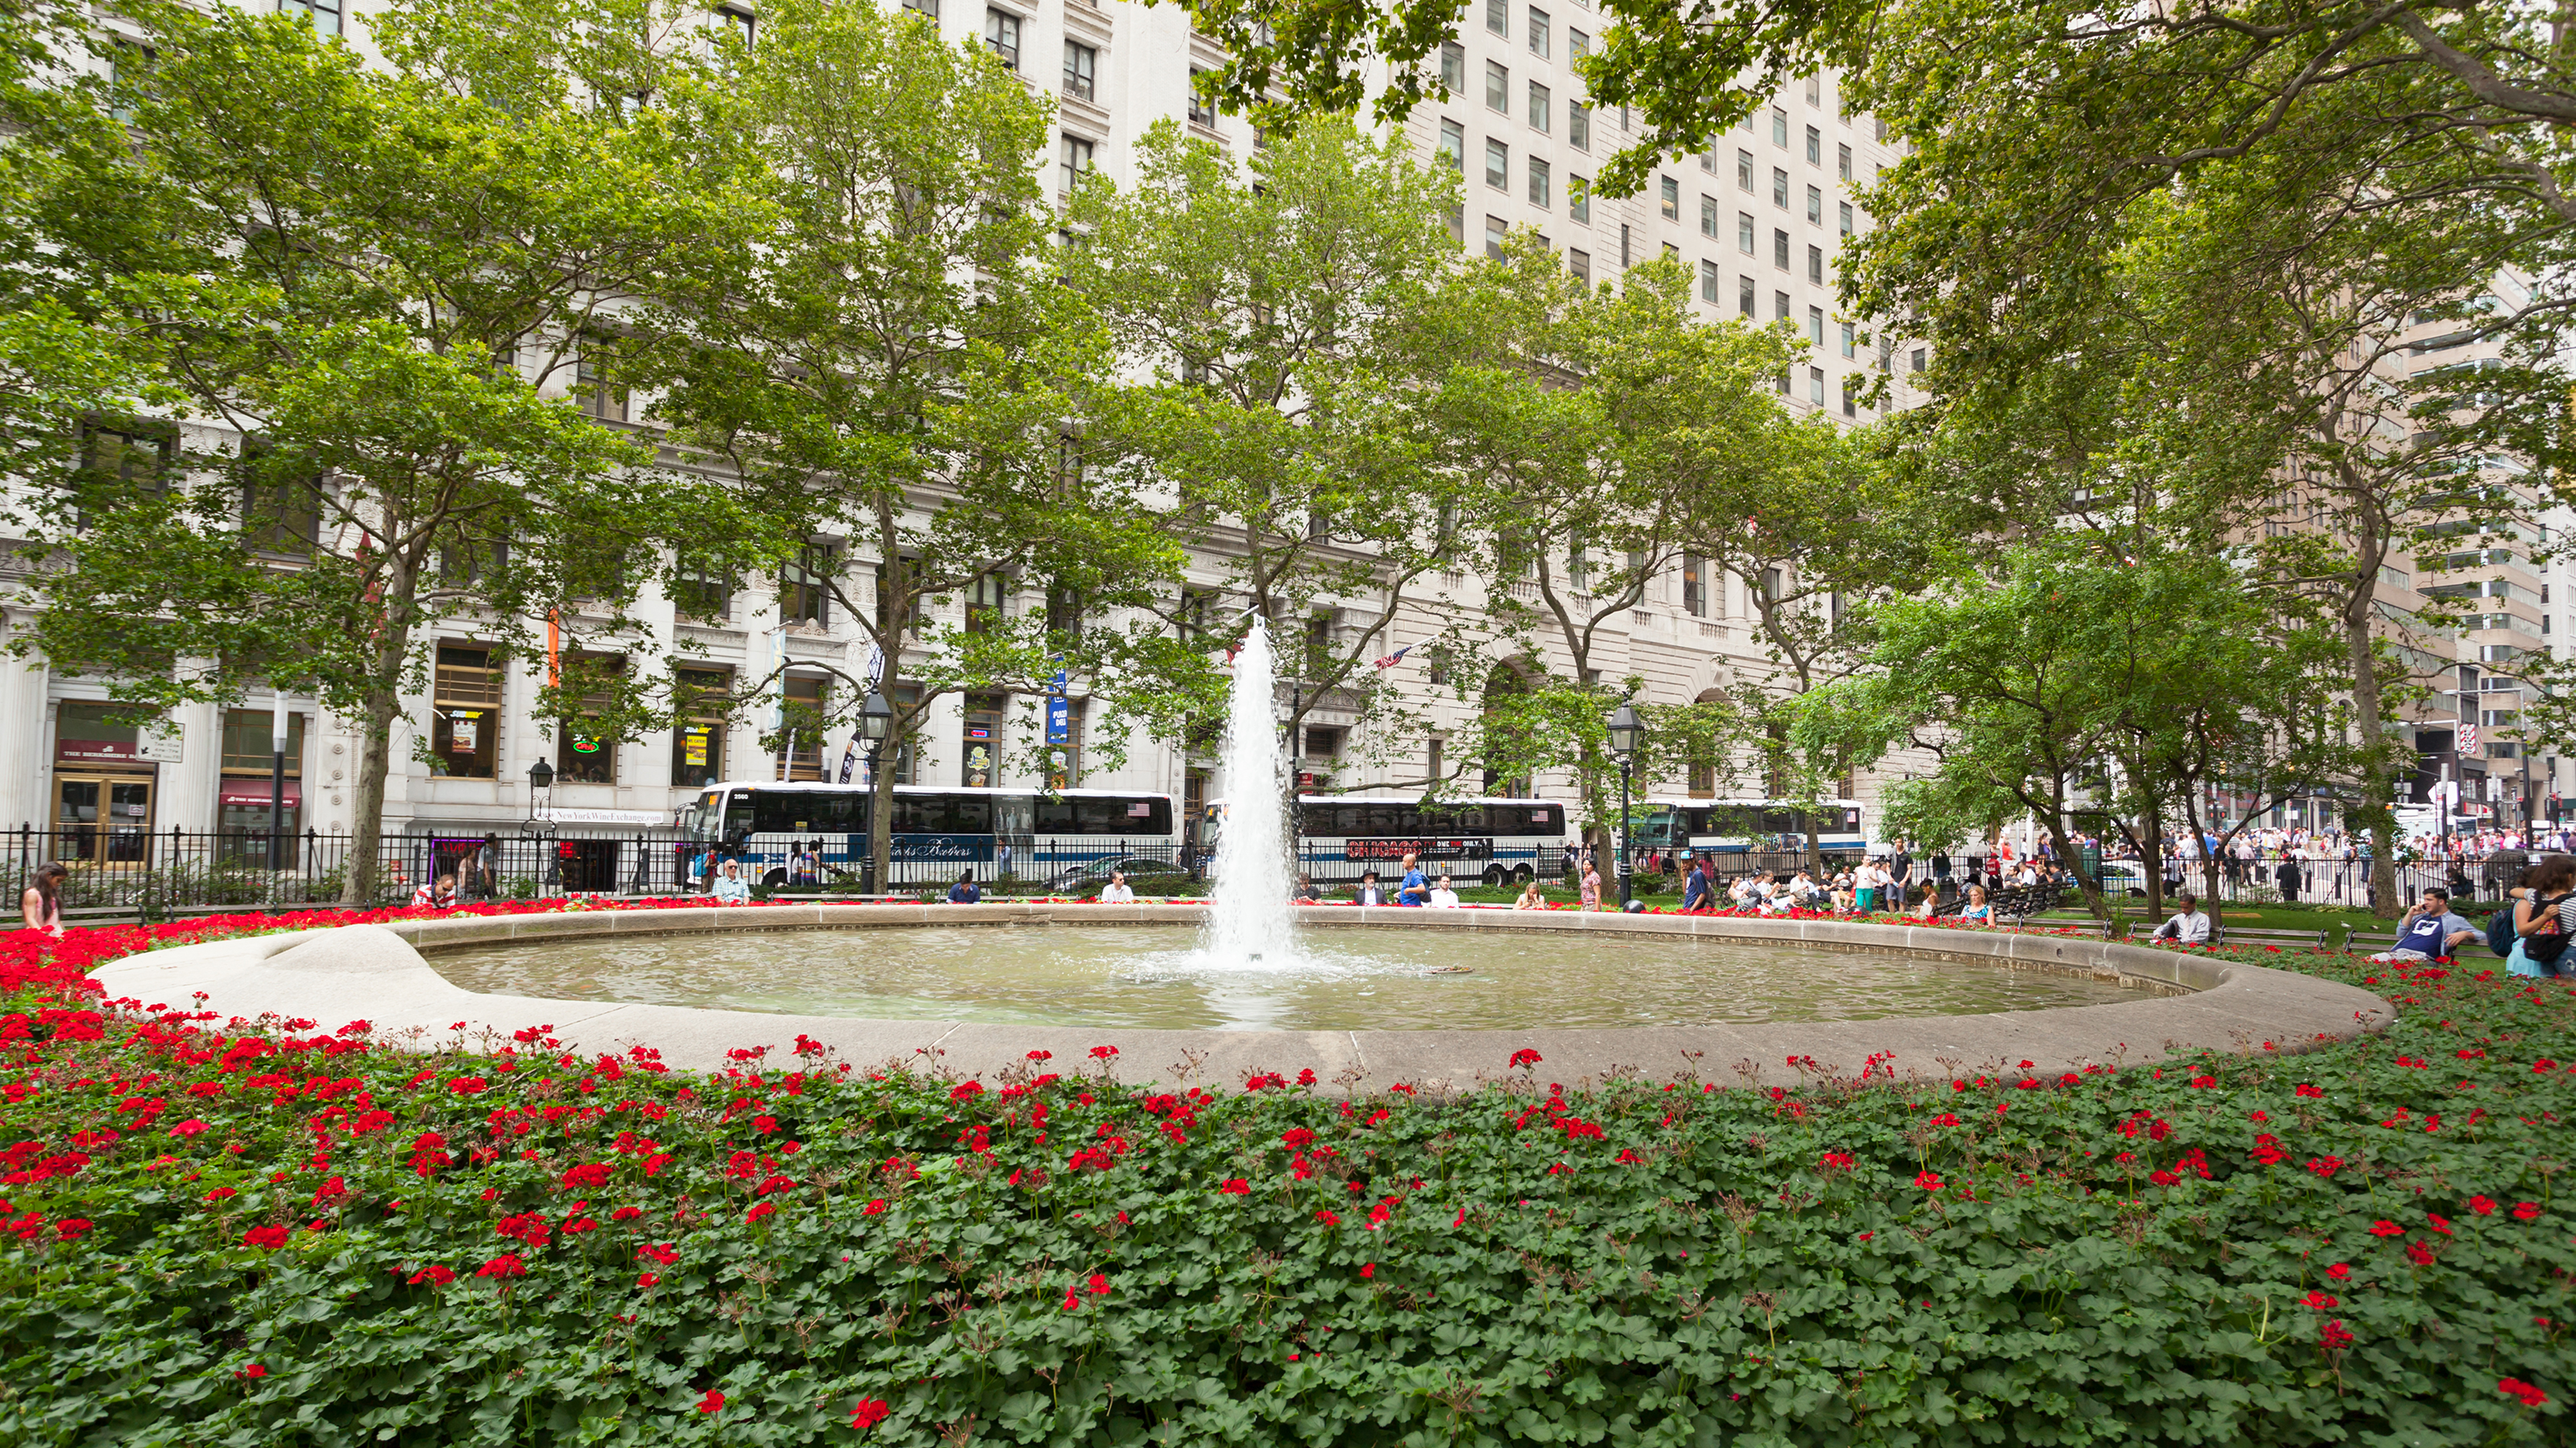 In the middle of a city, there is a green space filled with trees, red flowers, and in the middle, a flowing fountain. 